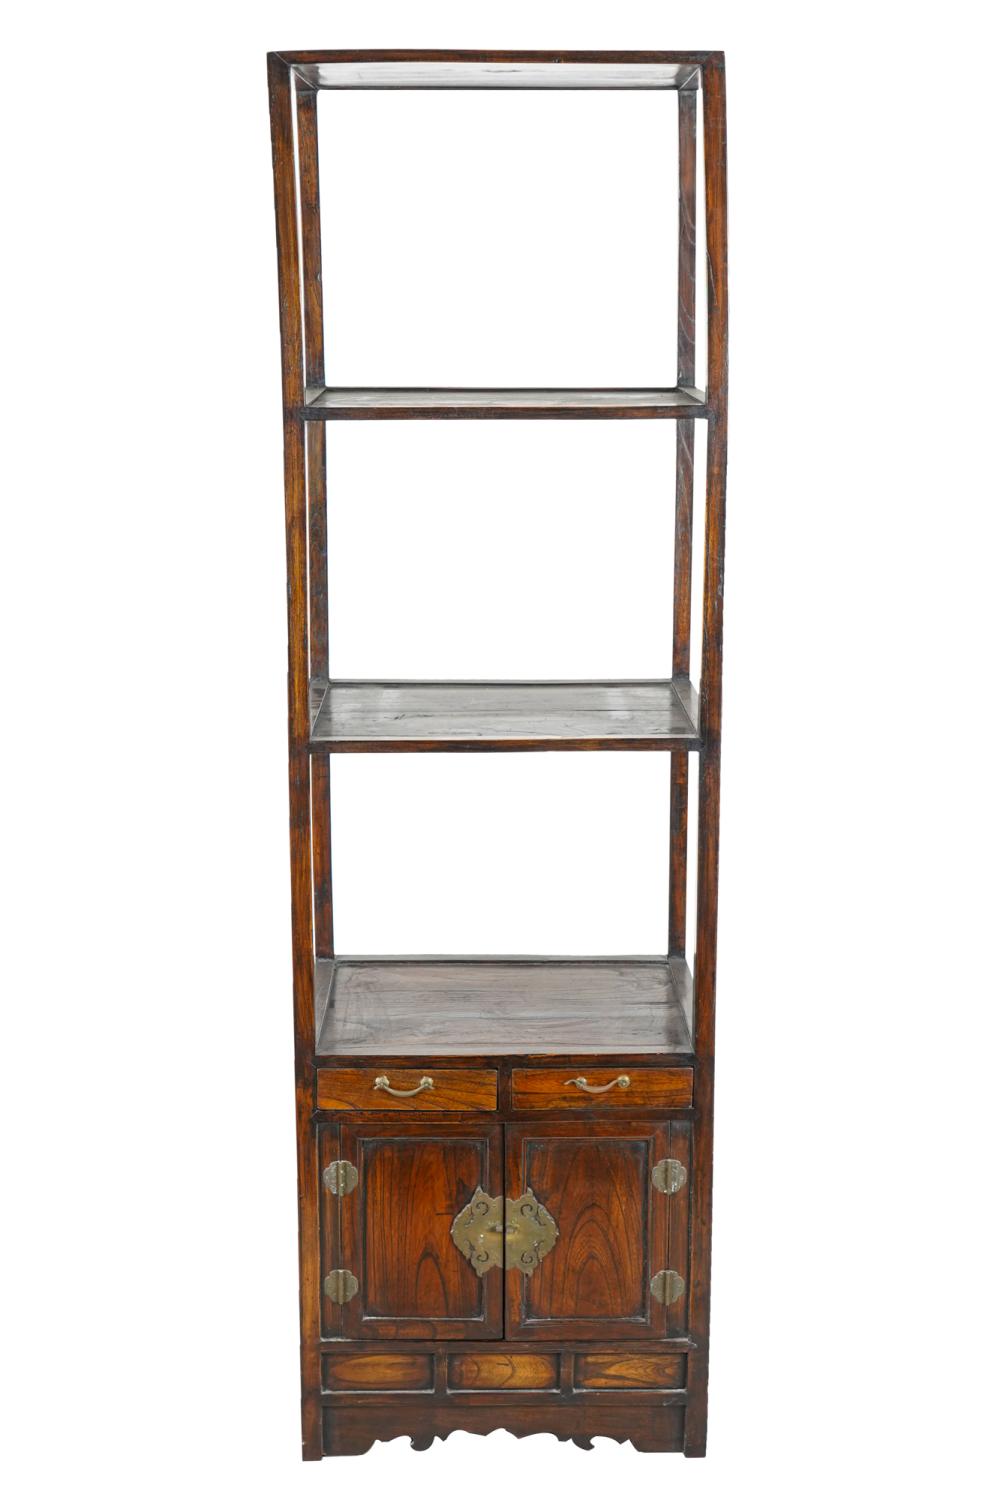 ASIAN-STYLE ETAGERE CABINETwith